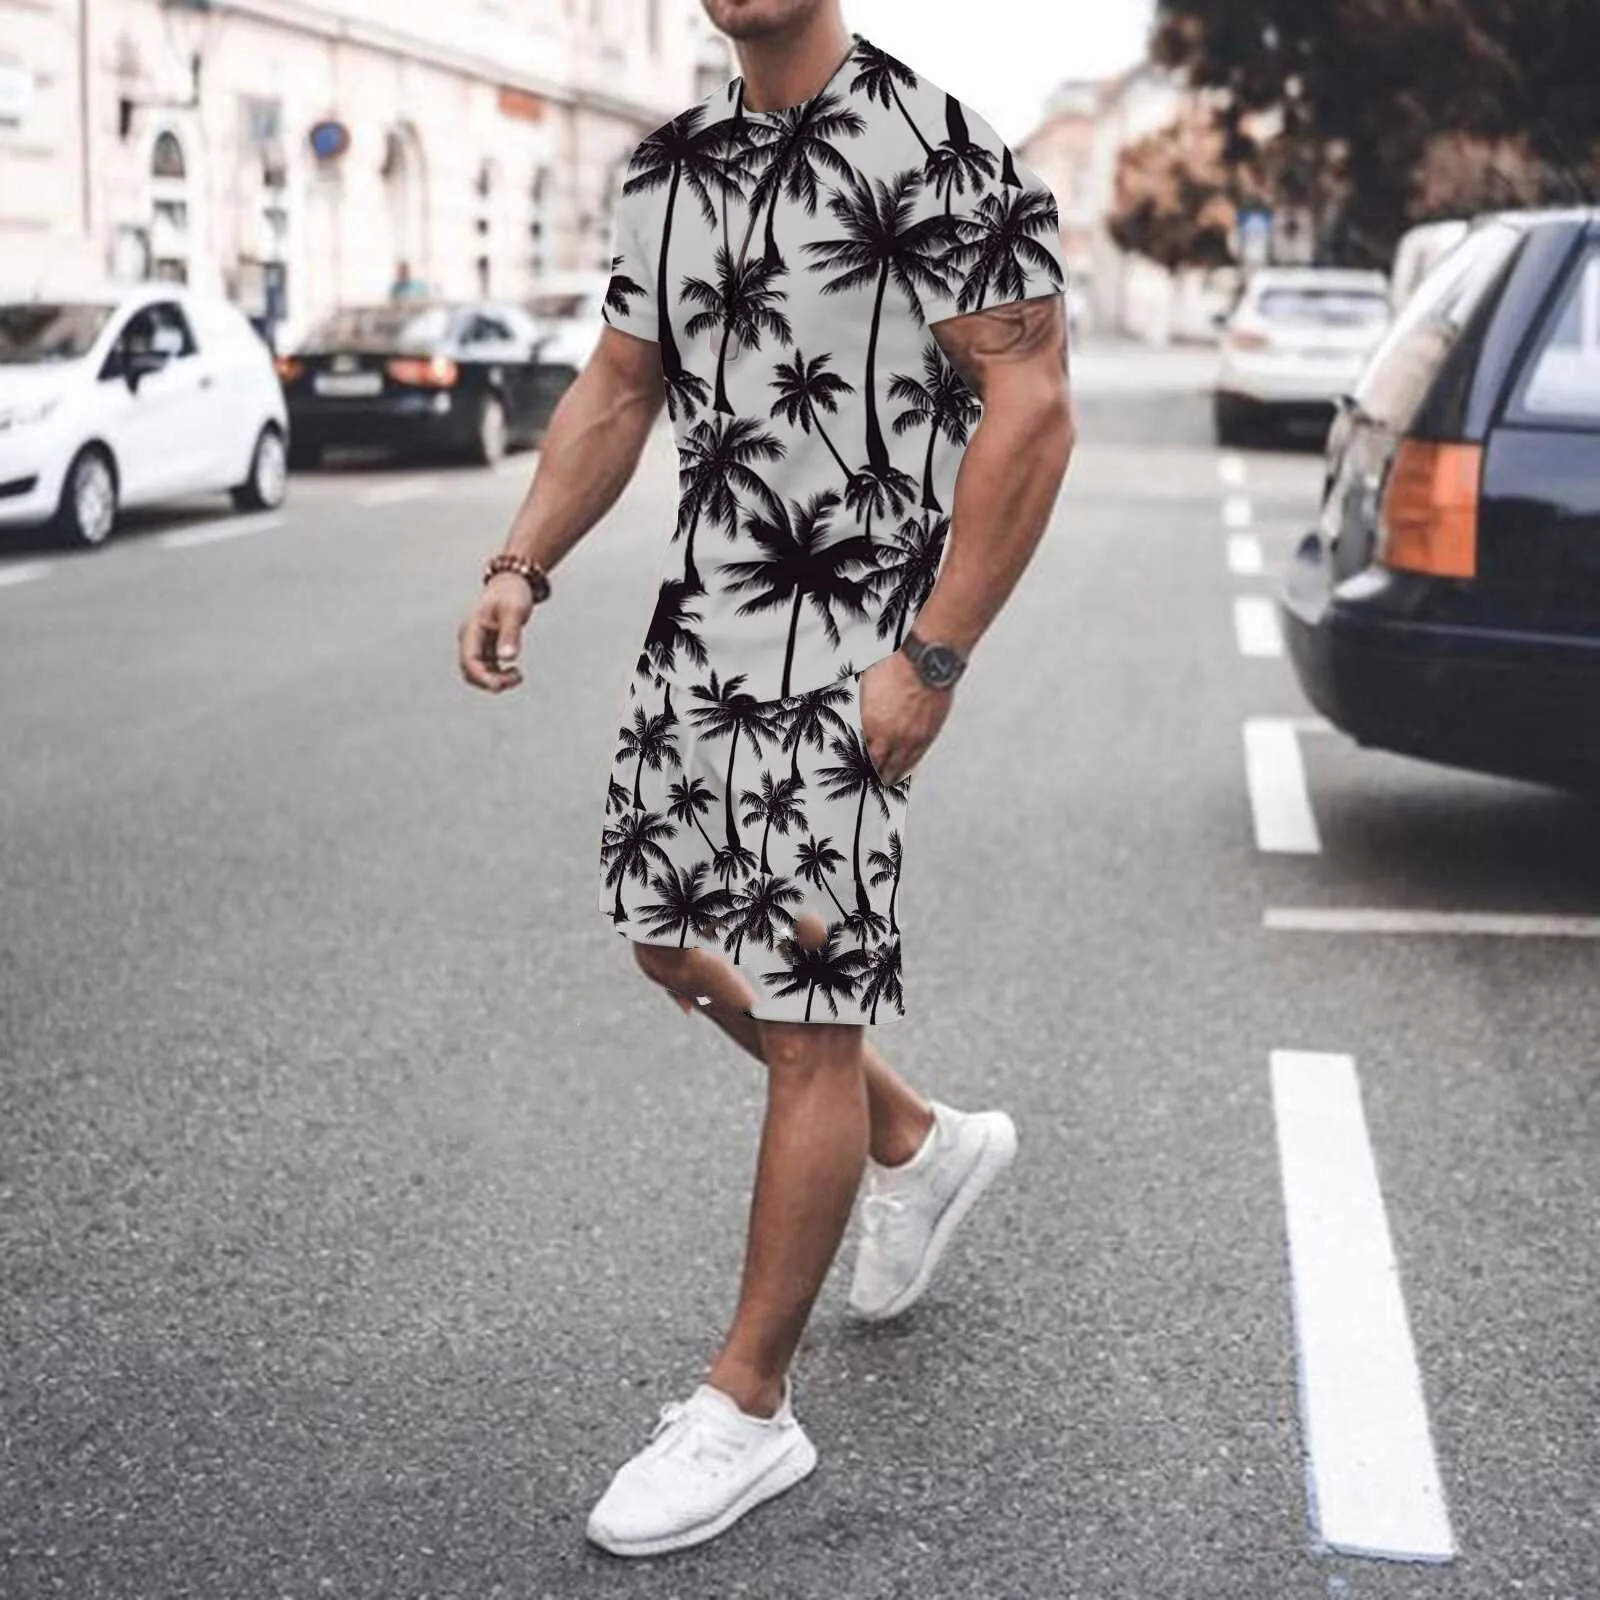 Men Fashion Trend Tracksuit Male Casual Beach Style T-Shirt Shorts Set 2 Pieces Outfit Summer Oversized Streetwear Outfit